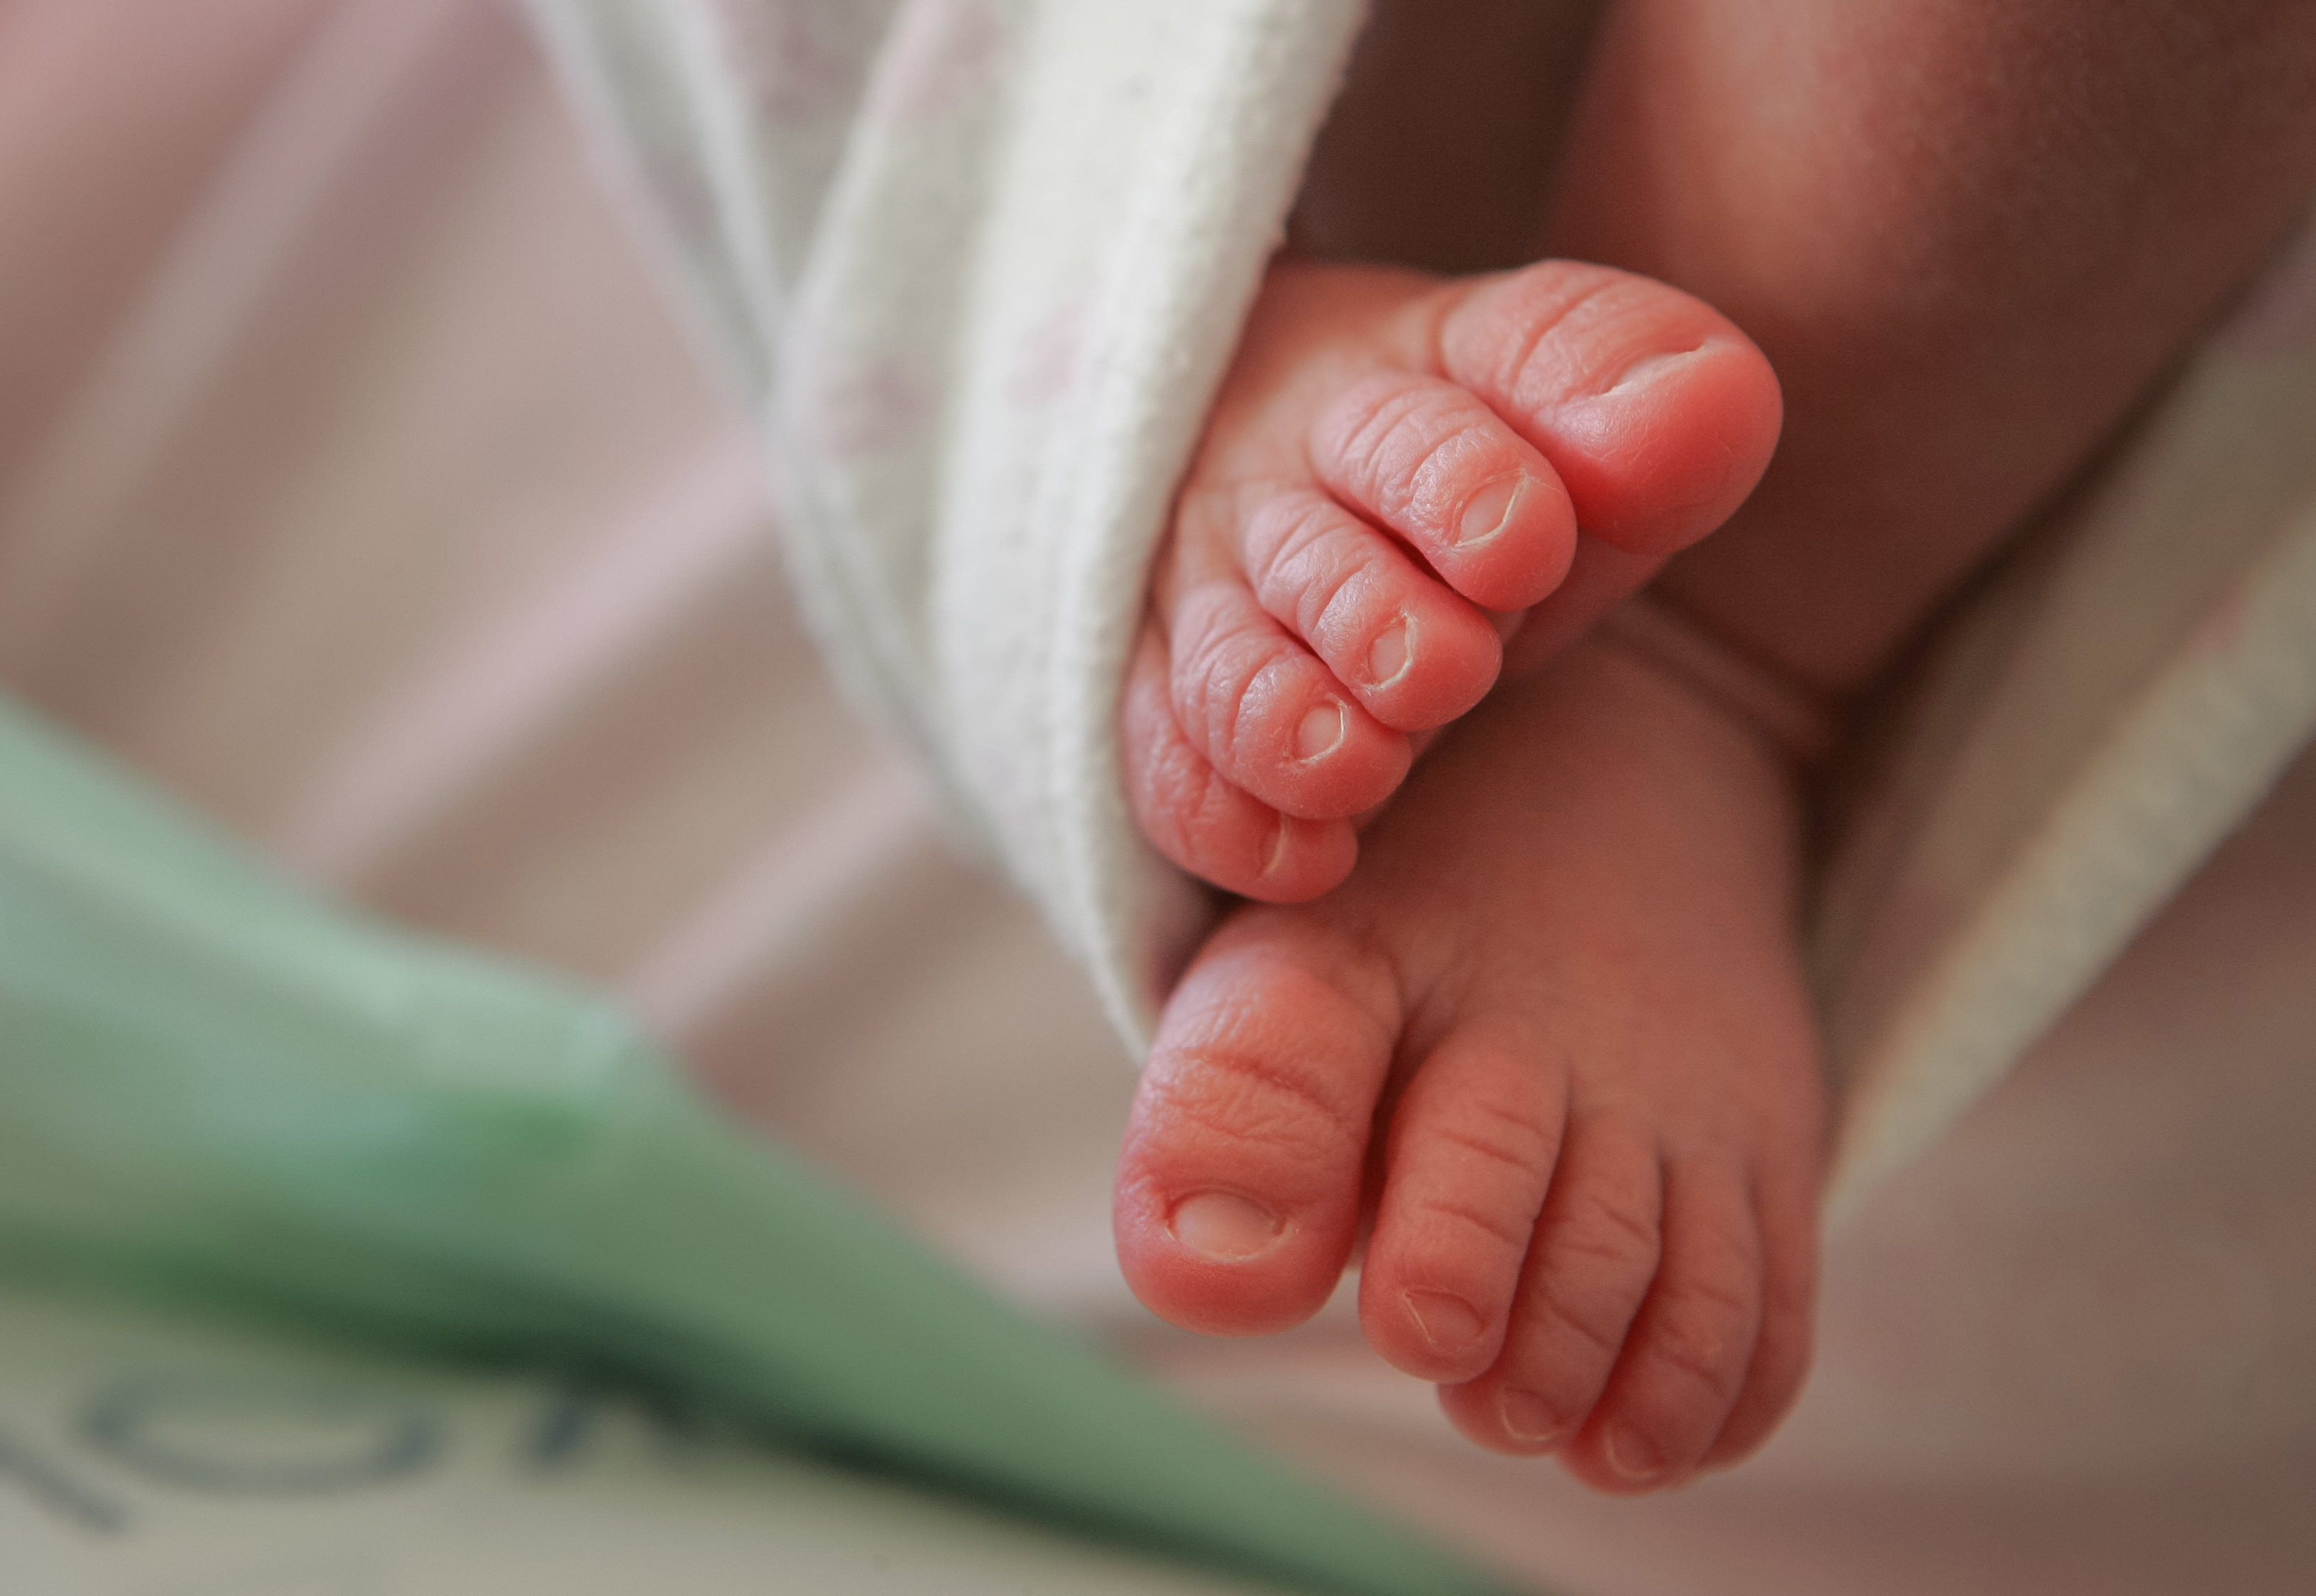 Live births in Oman register four per cent growth this year